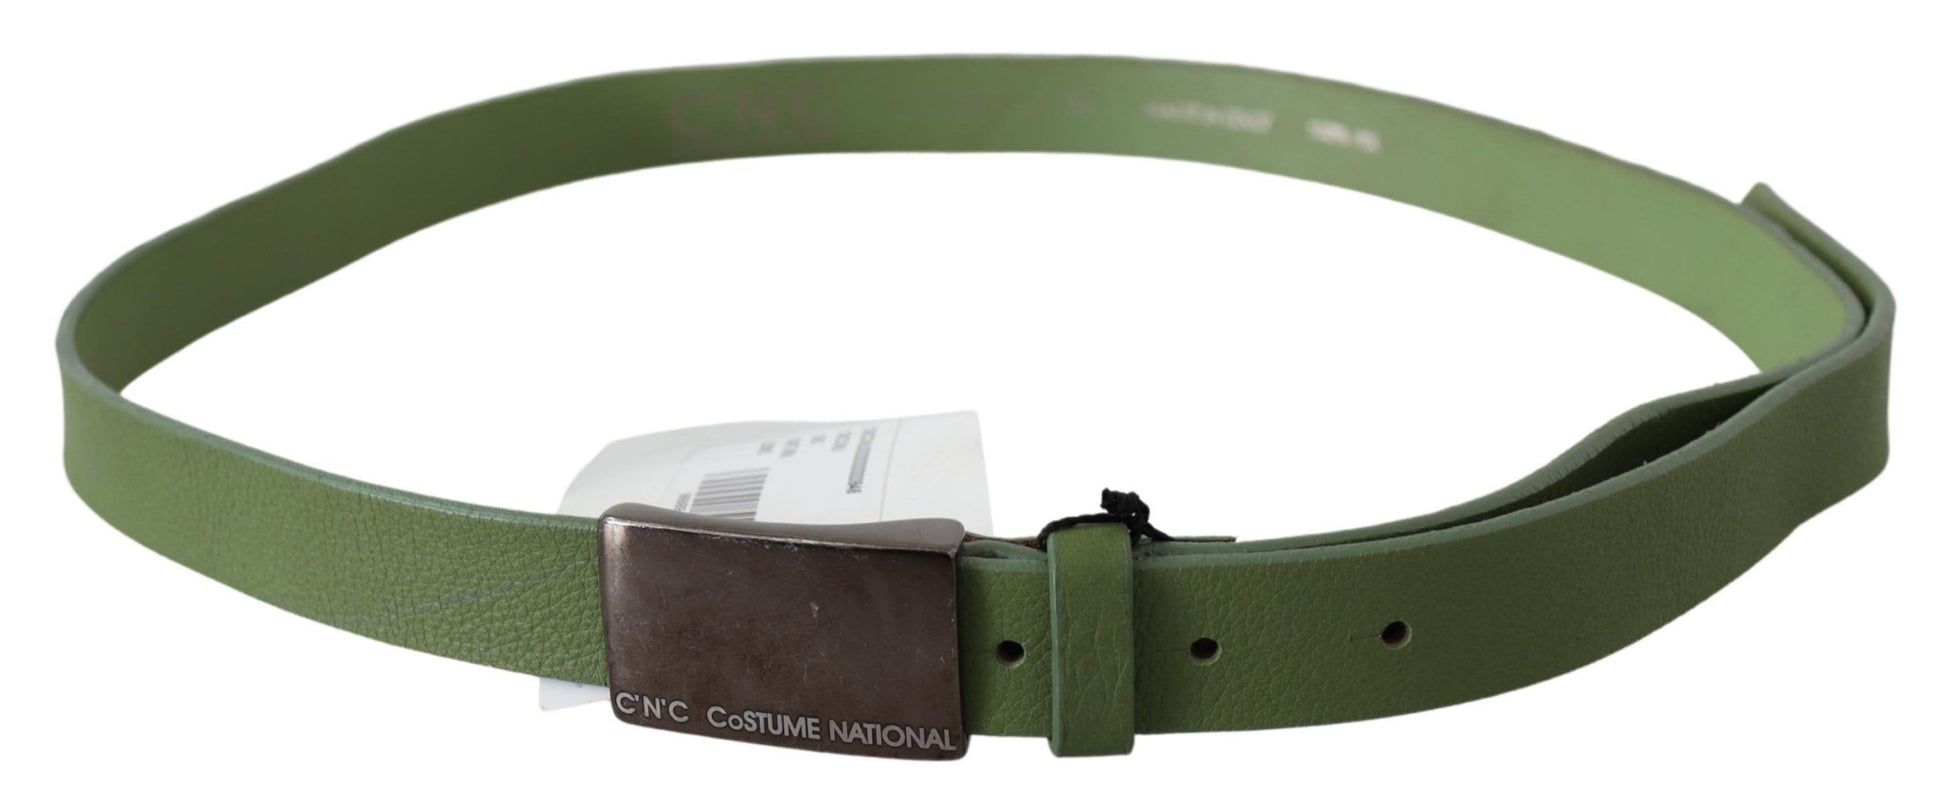 Chic Green Leather Waist Belt with Silver Buckle